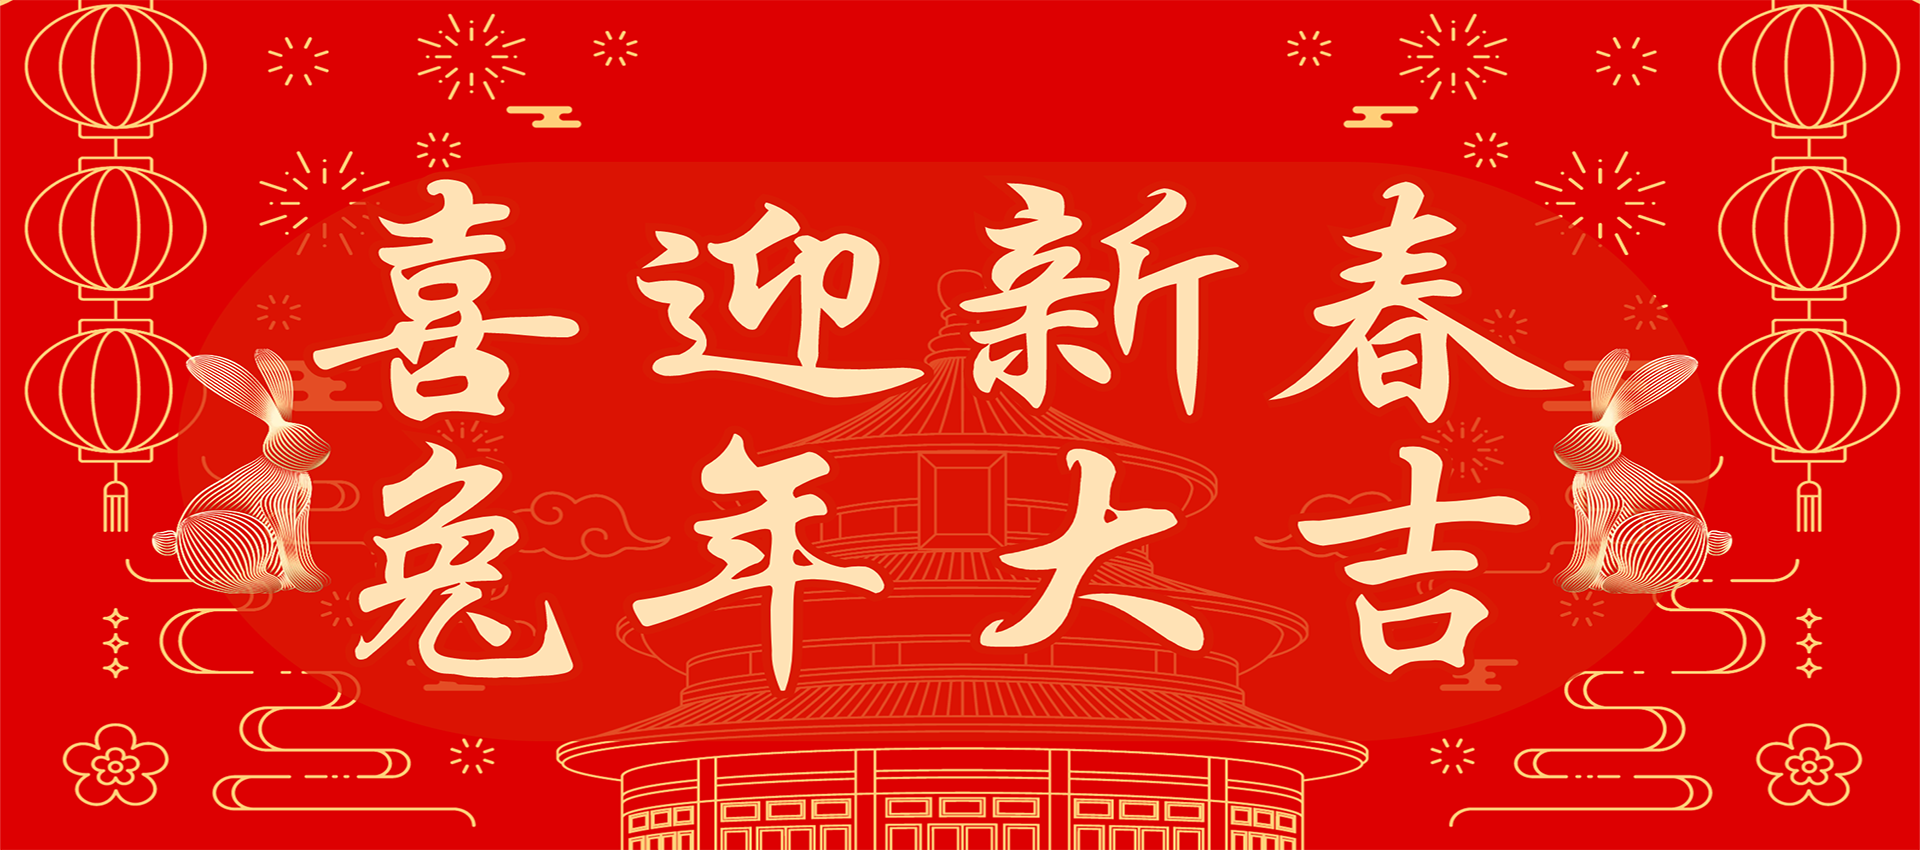 <span style="display:none;">新年快乐</span>